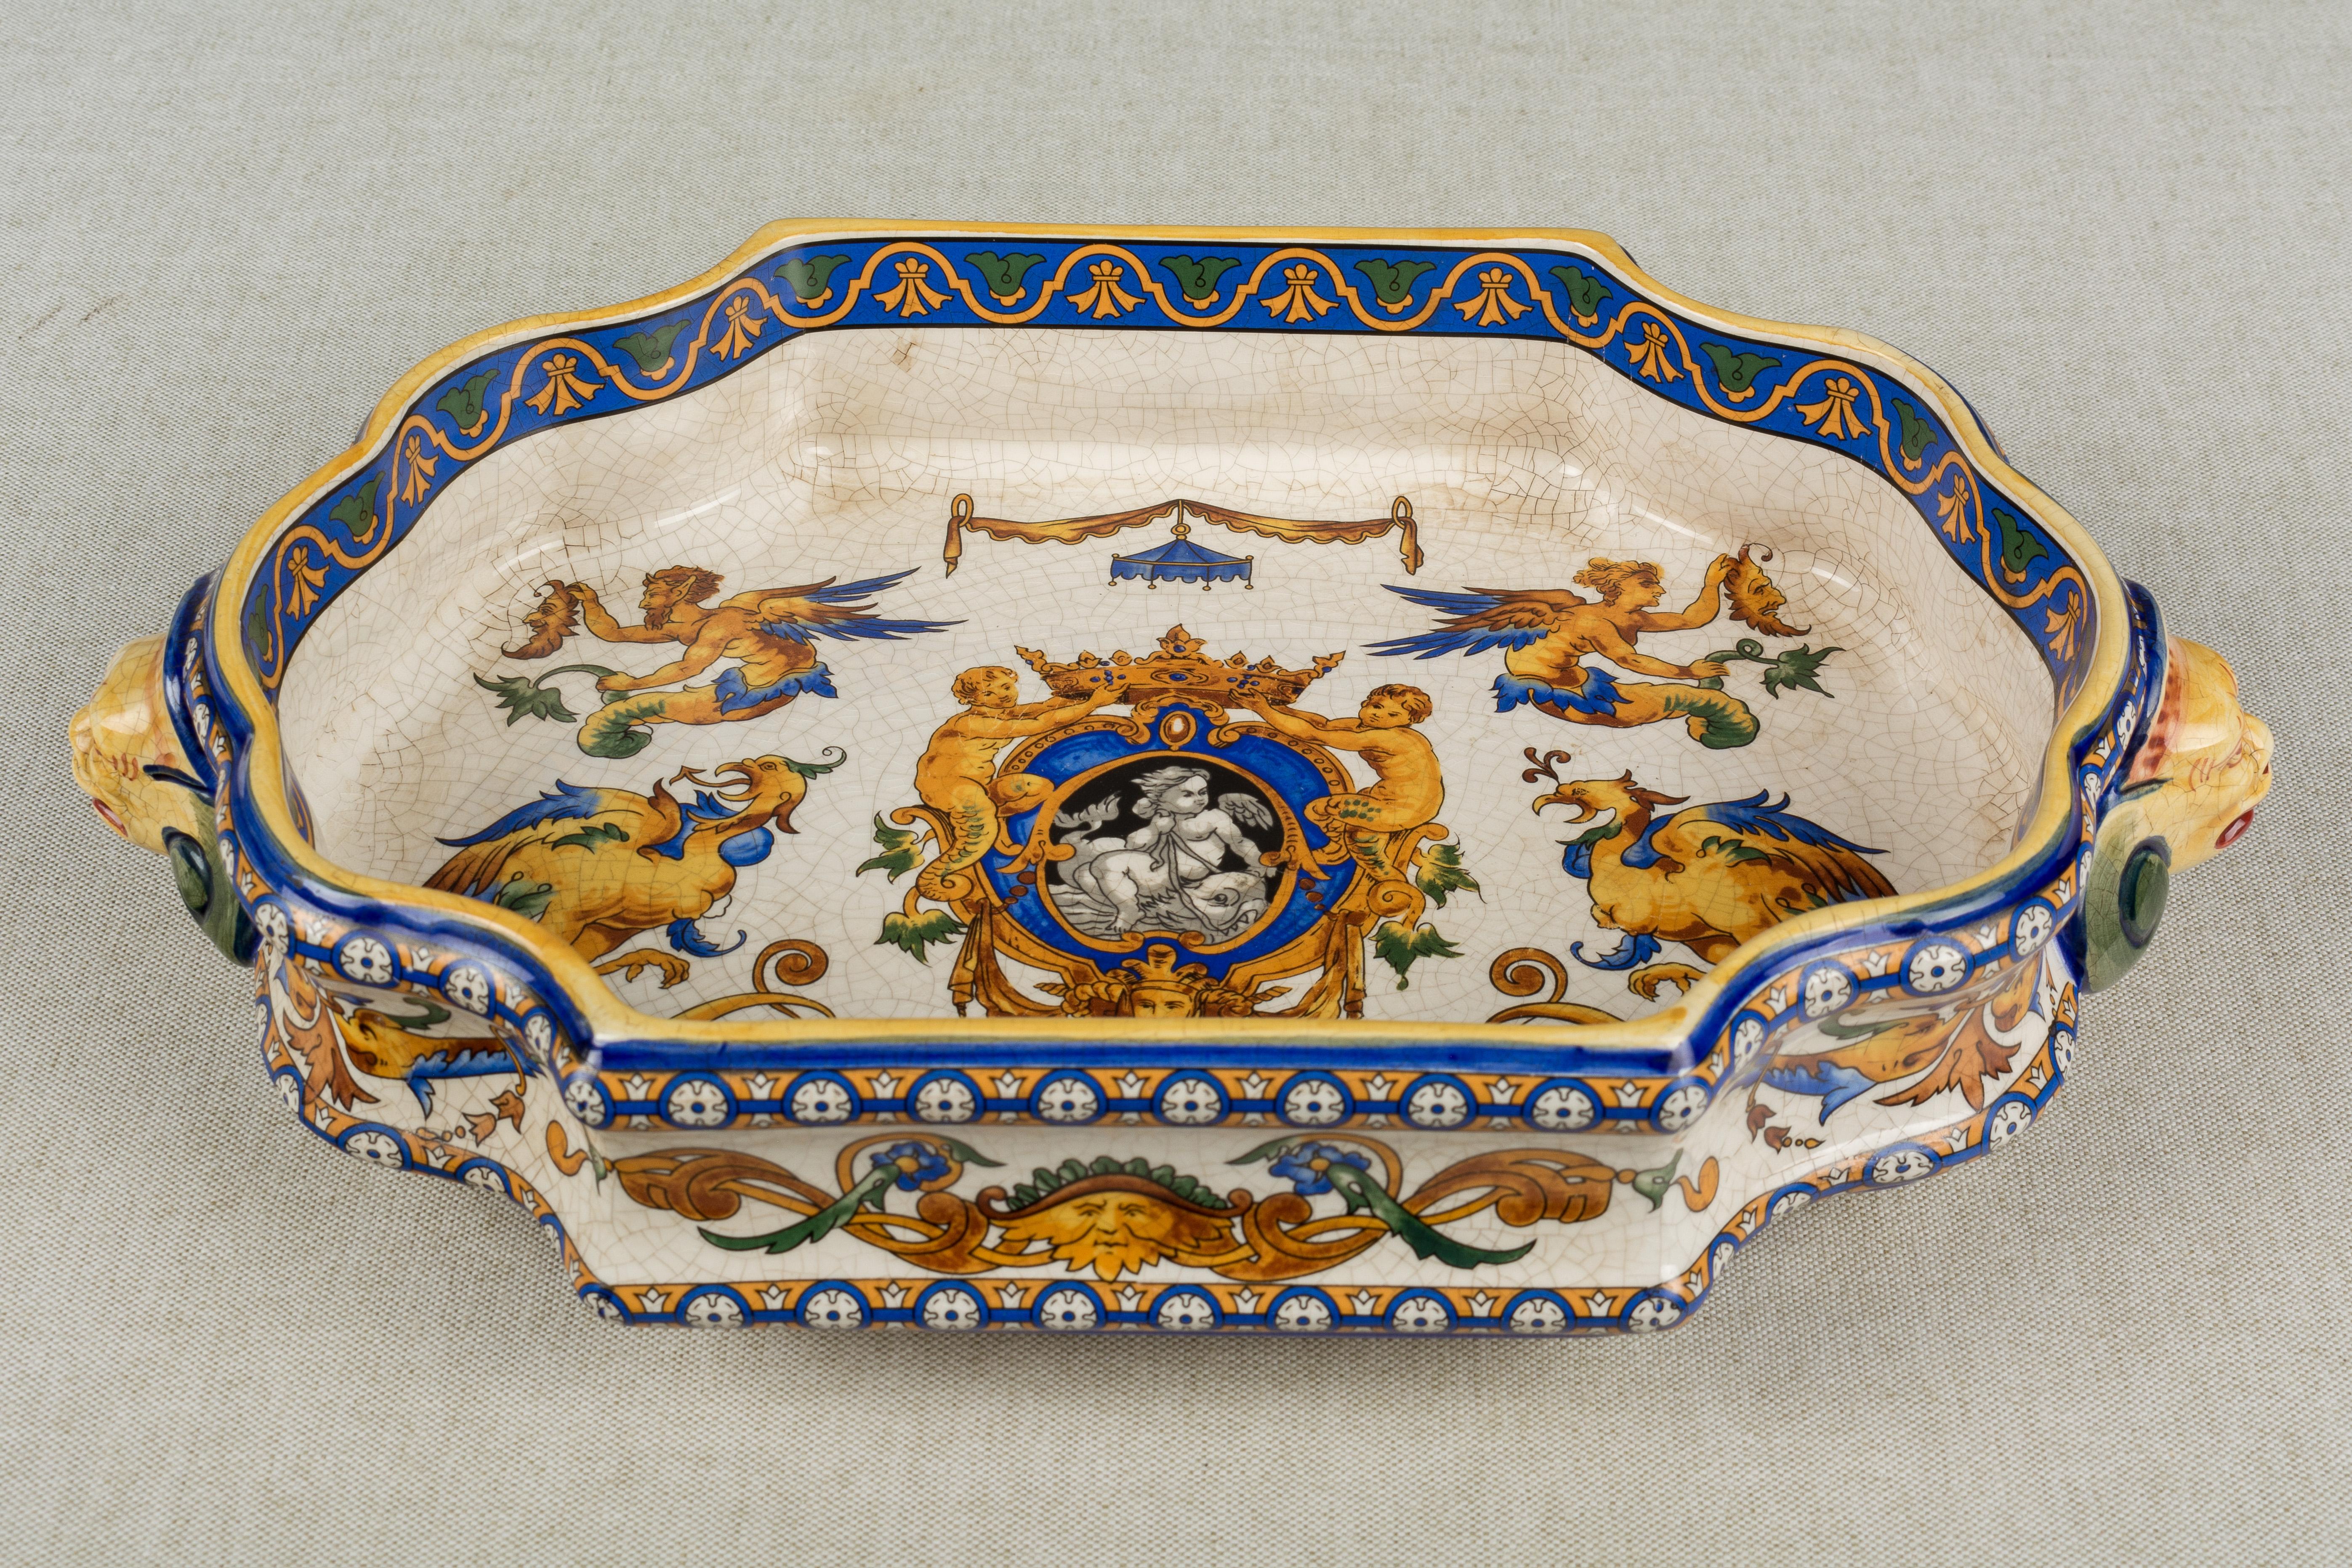 A 19th century French Gien faience ceramic jardinière, or shallow footed centerpiece bowl. Hand painted in orange, yellow, green and blue with Renaissance style imagery including a central medallion with crown flanked by a pair of phoenix, or winged